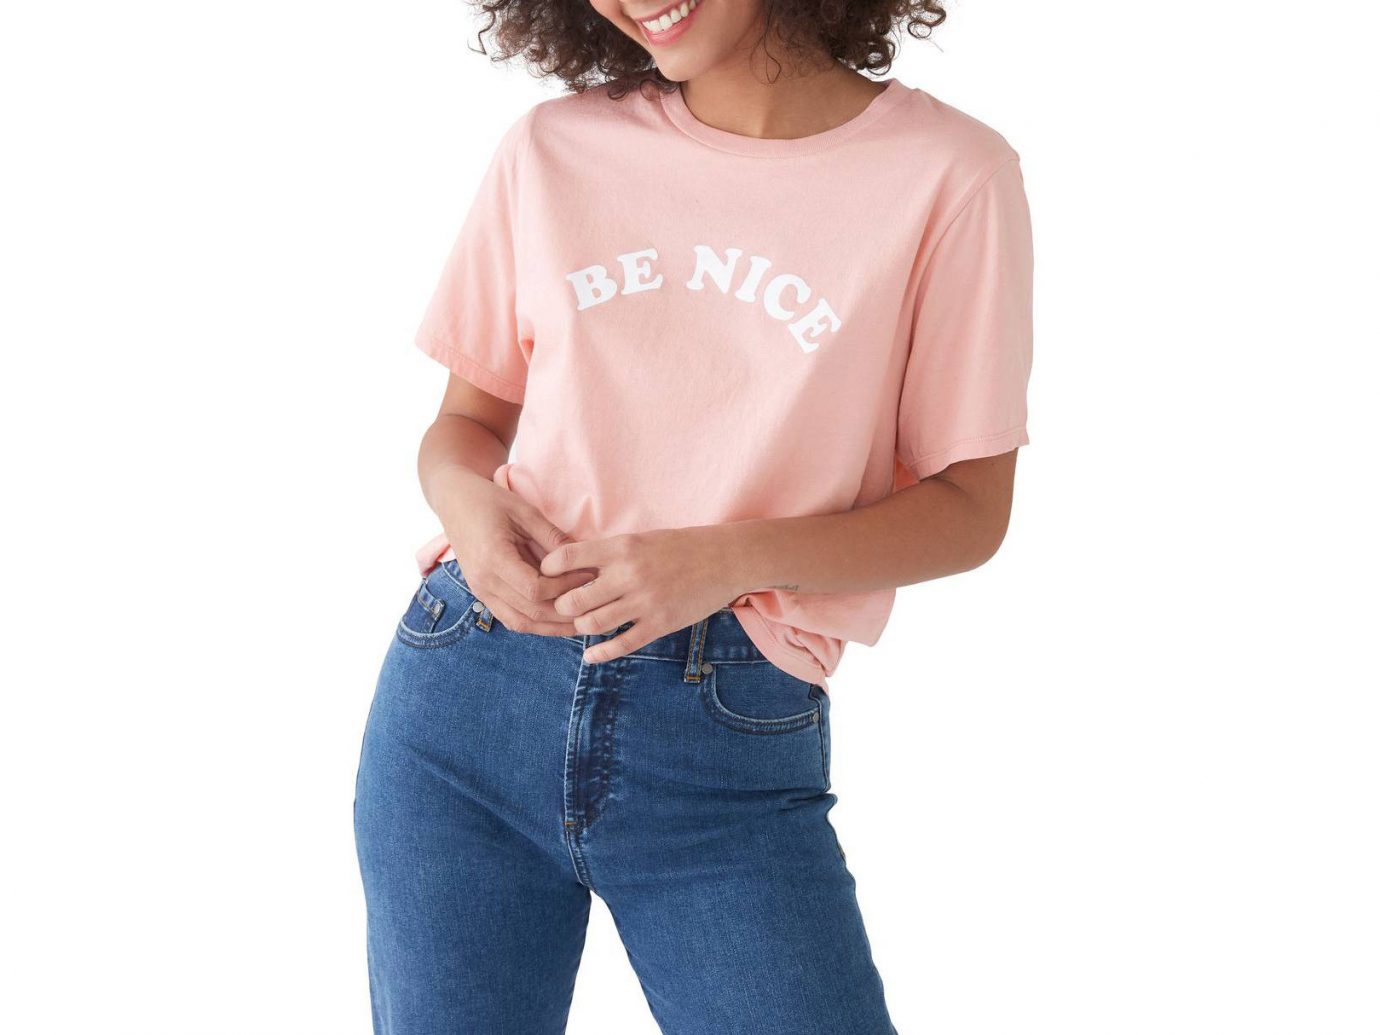 Spring Travel Style + Design Summer Travel Travel Shop person clothing sleeve shoulder t shirt neck joint jeans blouse peach waist trouser